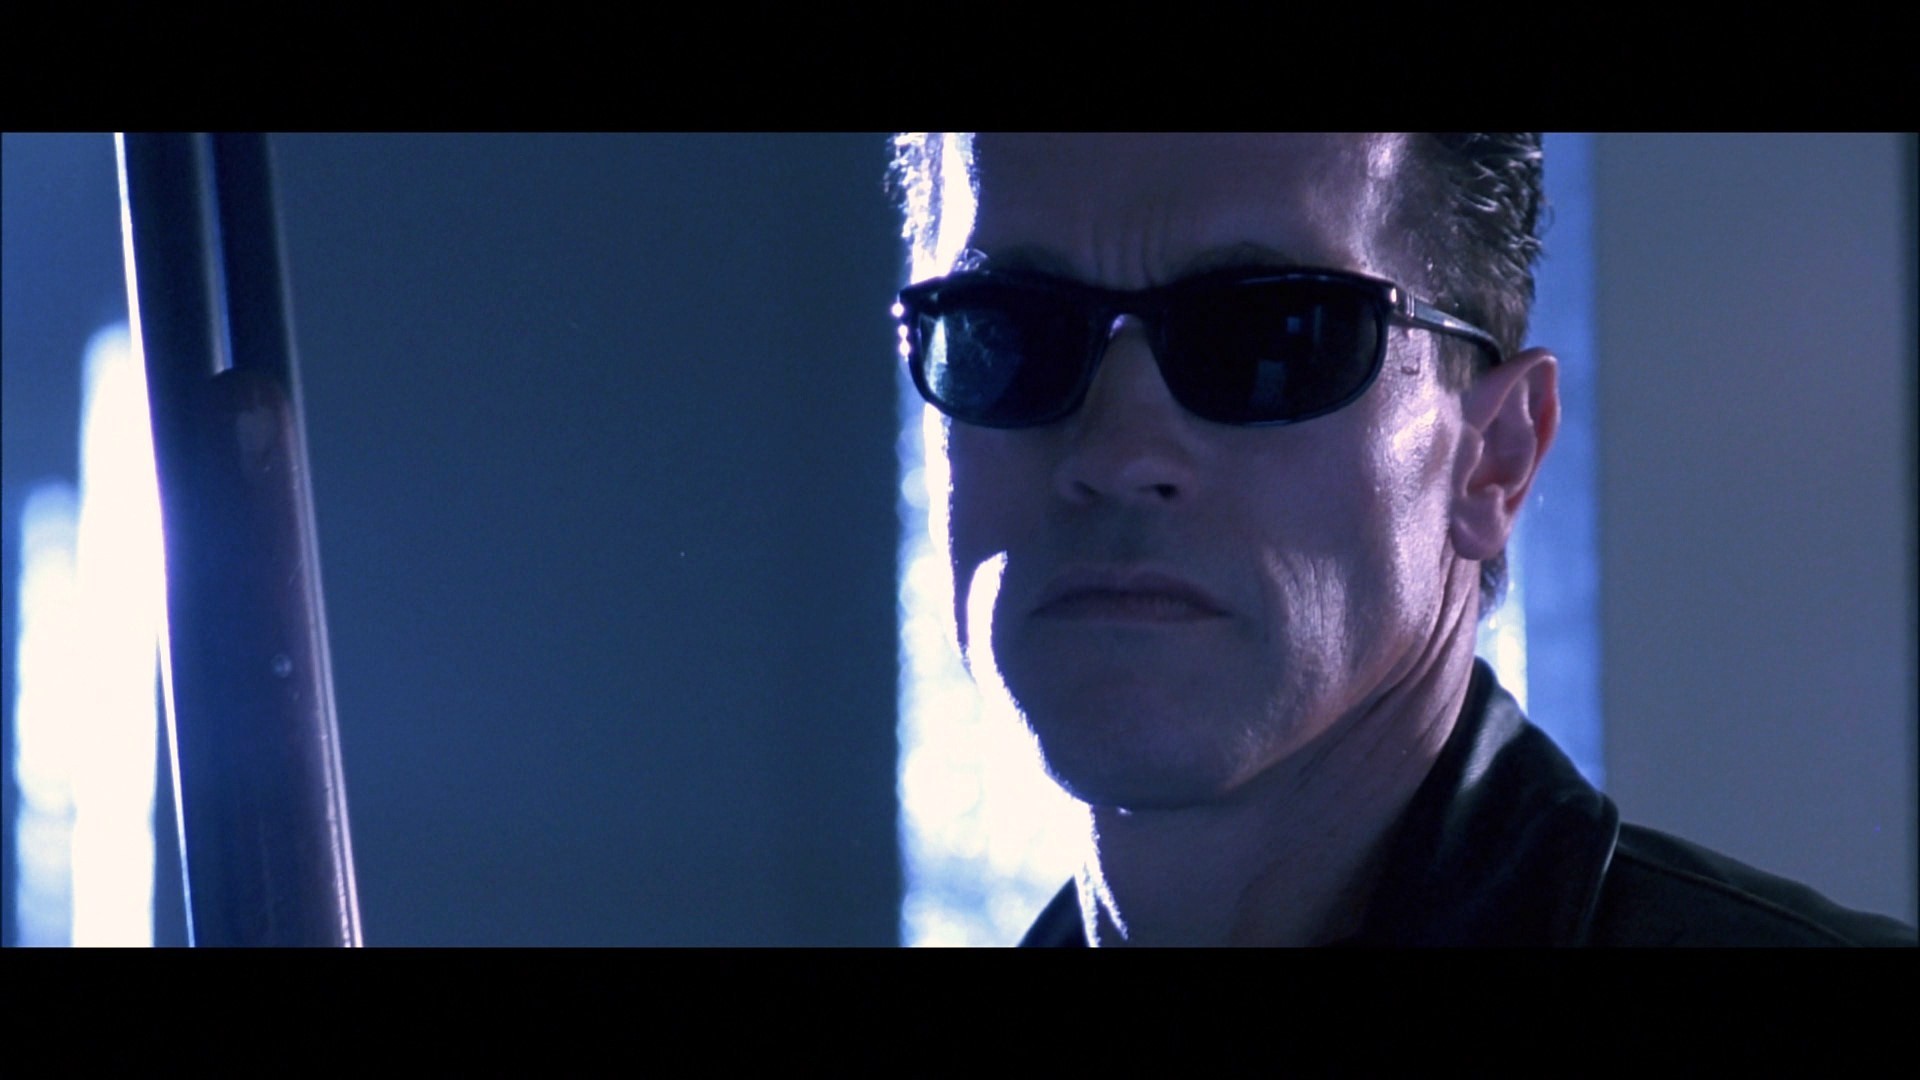 1920x1080 Terminator wallpaper possibly containing a Televisione receiver called Terminator  2